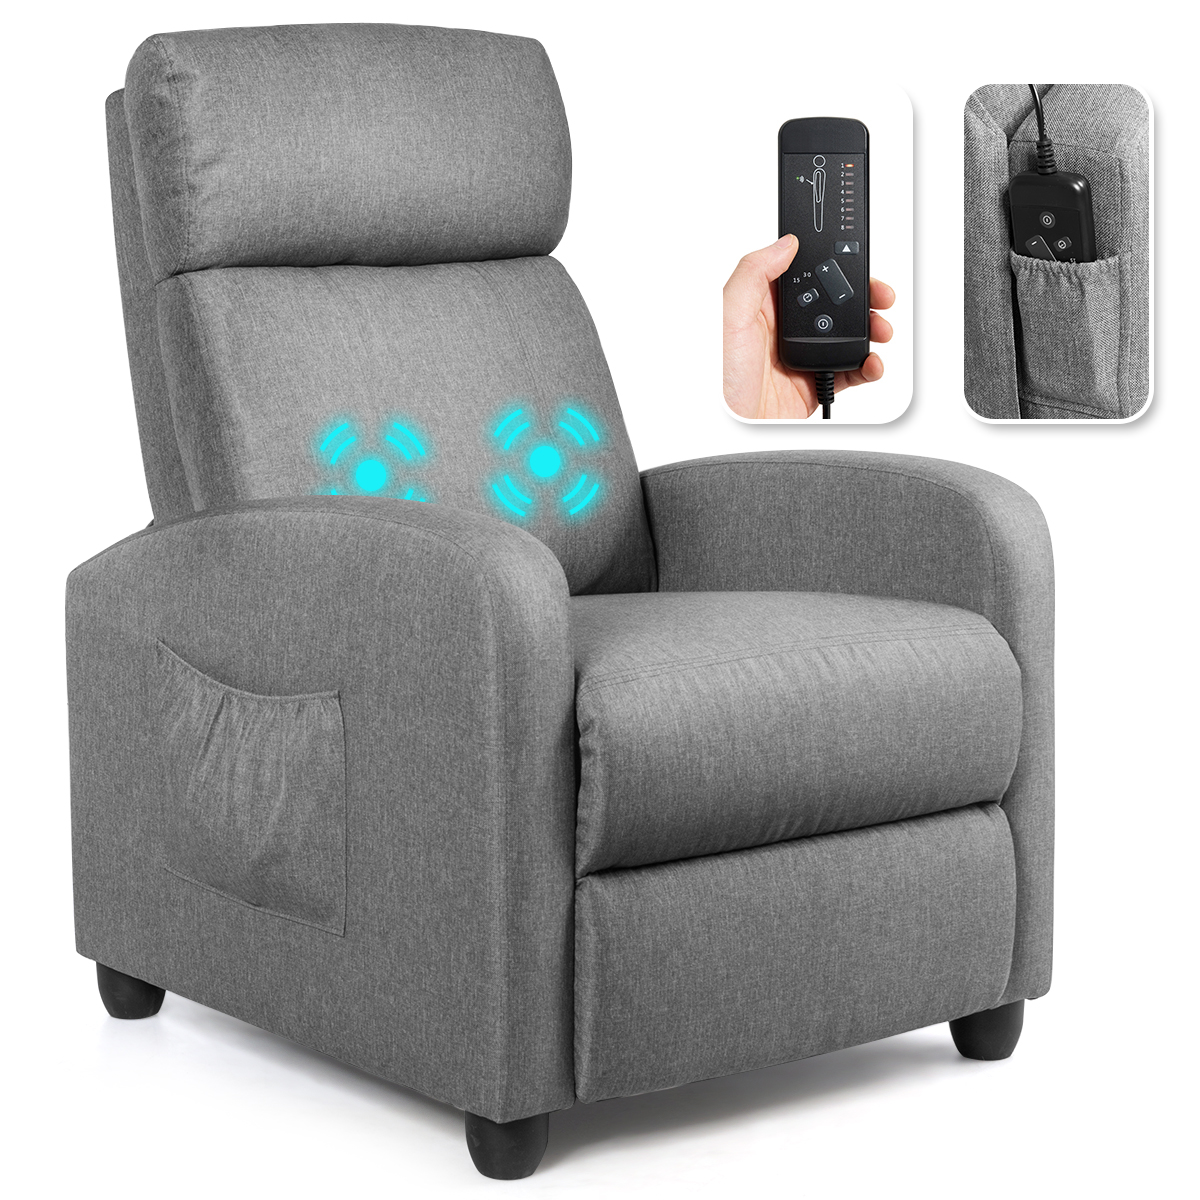 Costway Recliner Massage Chair, Ergonomic Adjustable Single Sofa with Padded Seat Grey